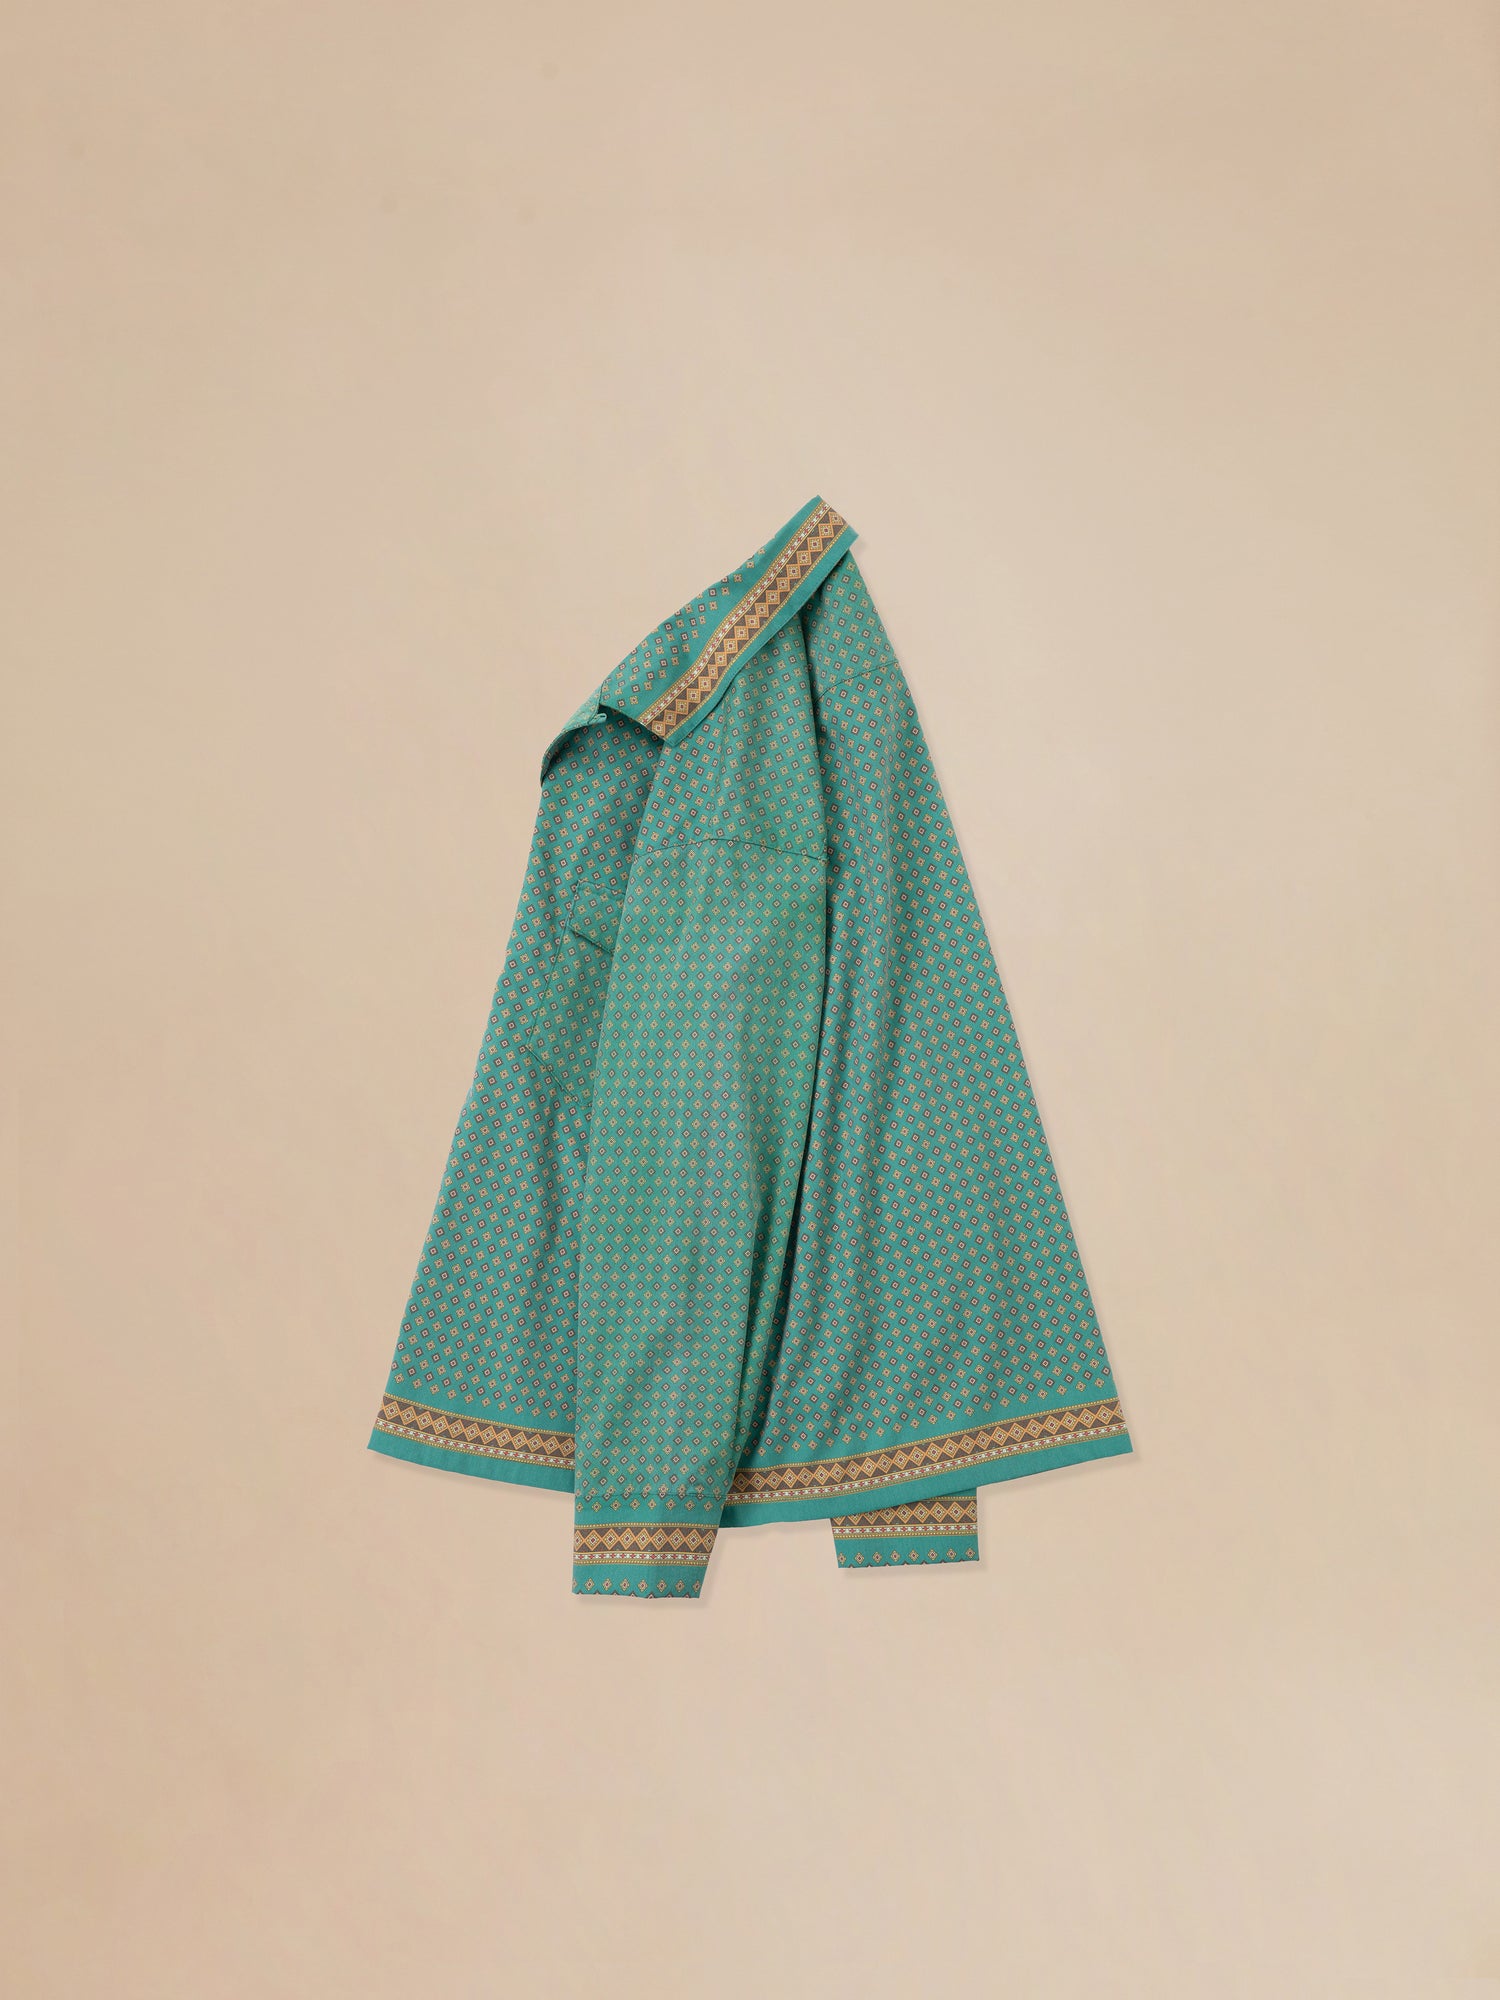 A green checkered Found Arbor Long Sleeve Camp Shirt on a beige background.